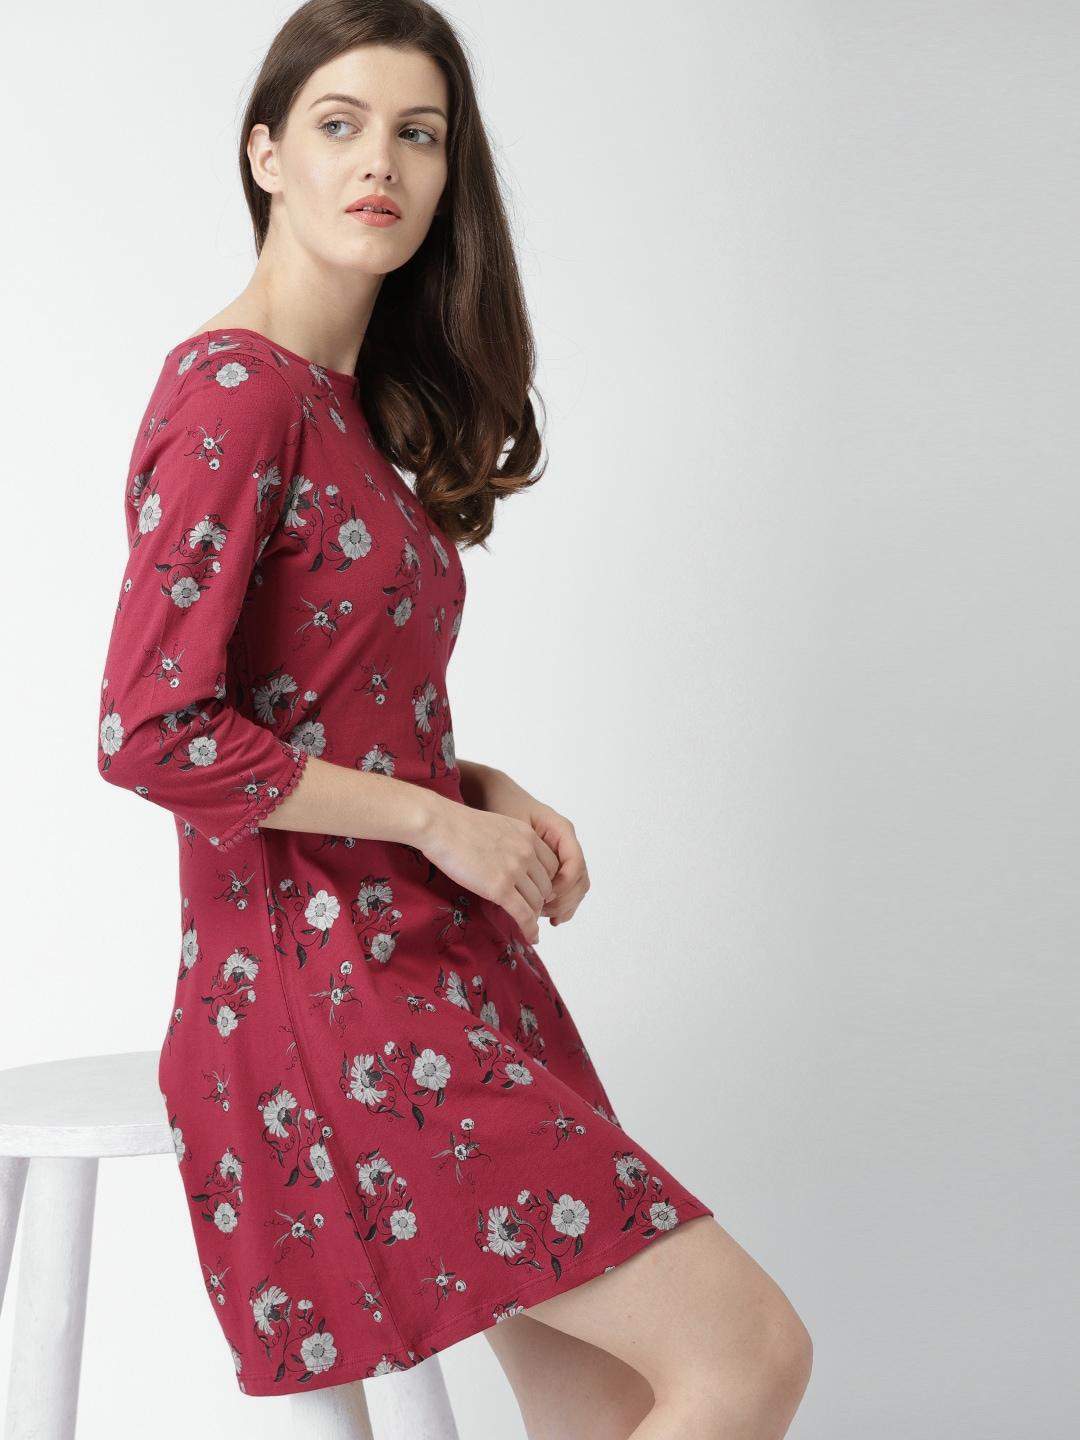 mast-&-harbour-women-maroon-printed-a-line-dress